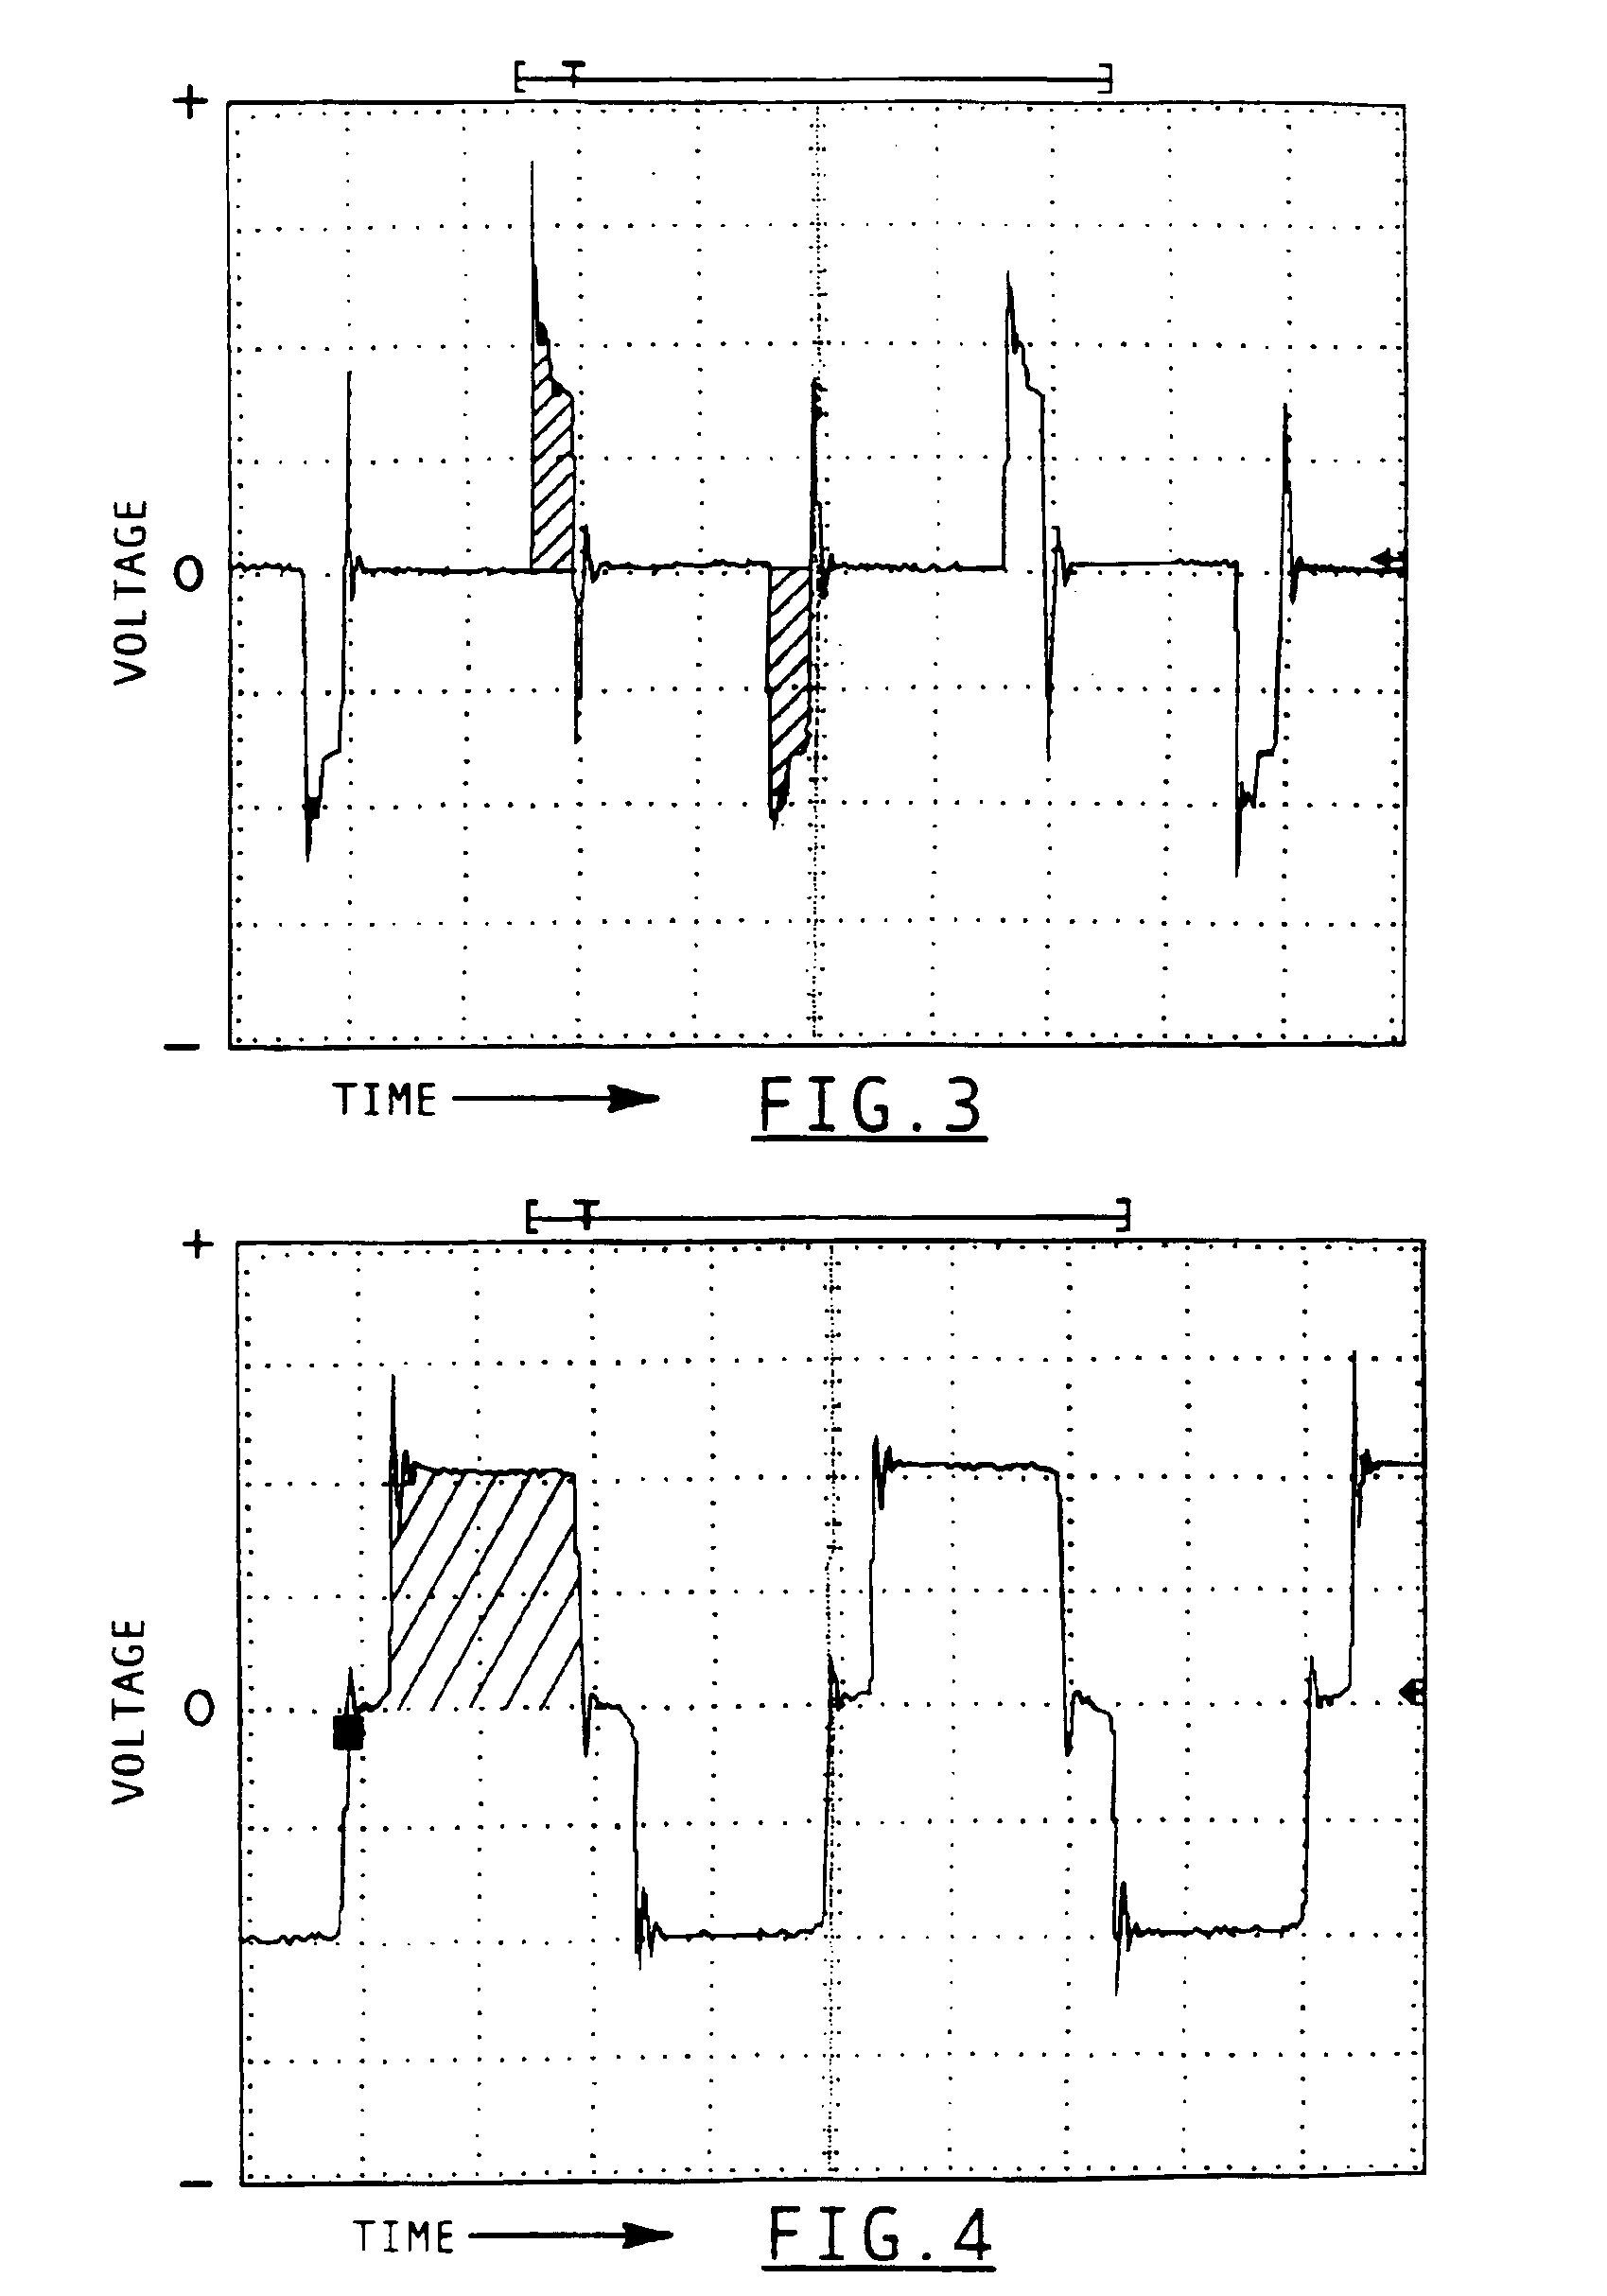 Zero-voltage-switched, full-bridge, phase-shifted DC-DC converter with improved light/no-load operation